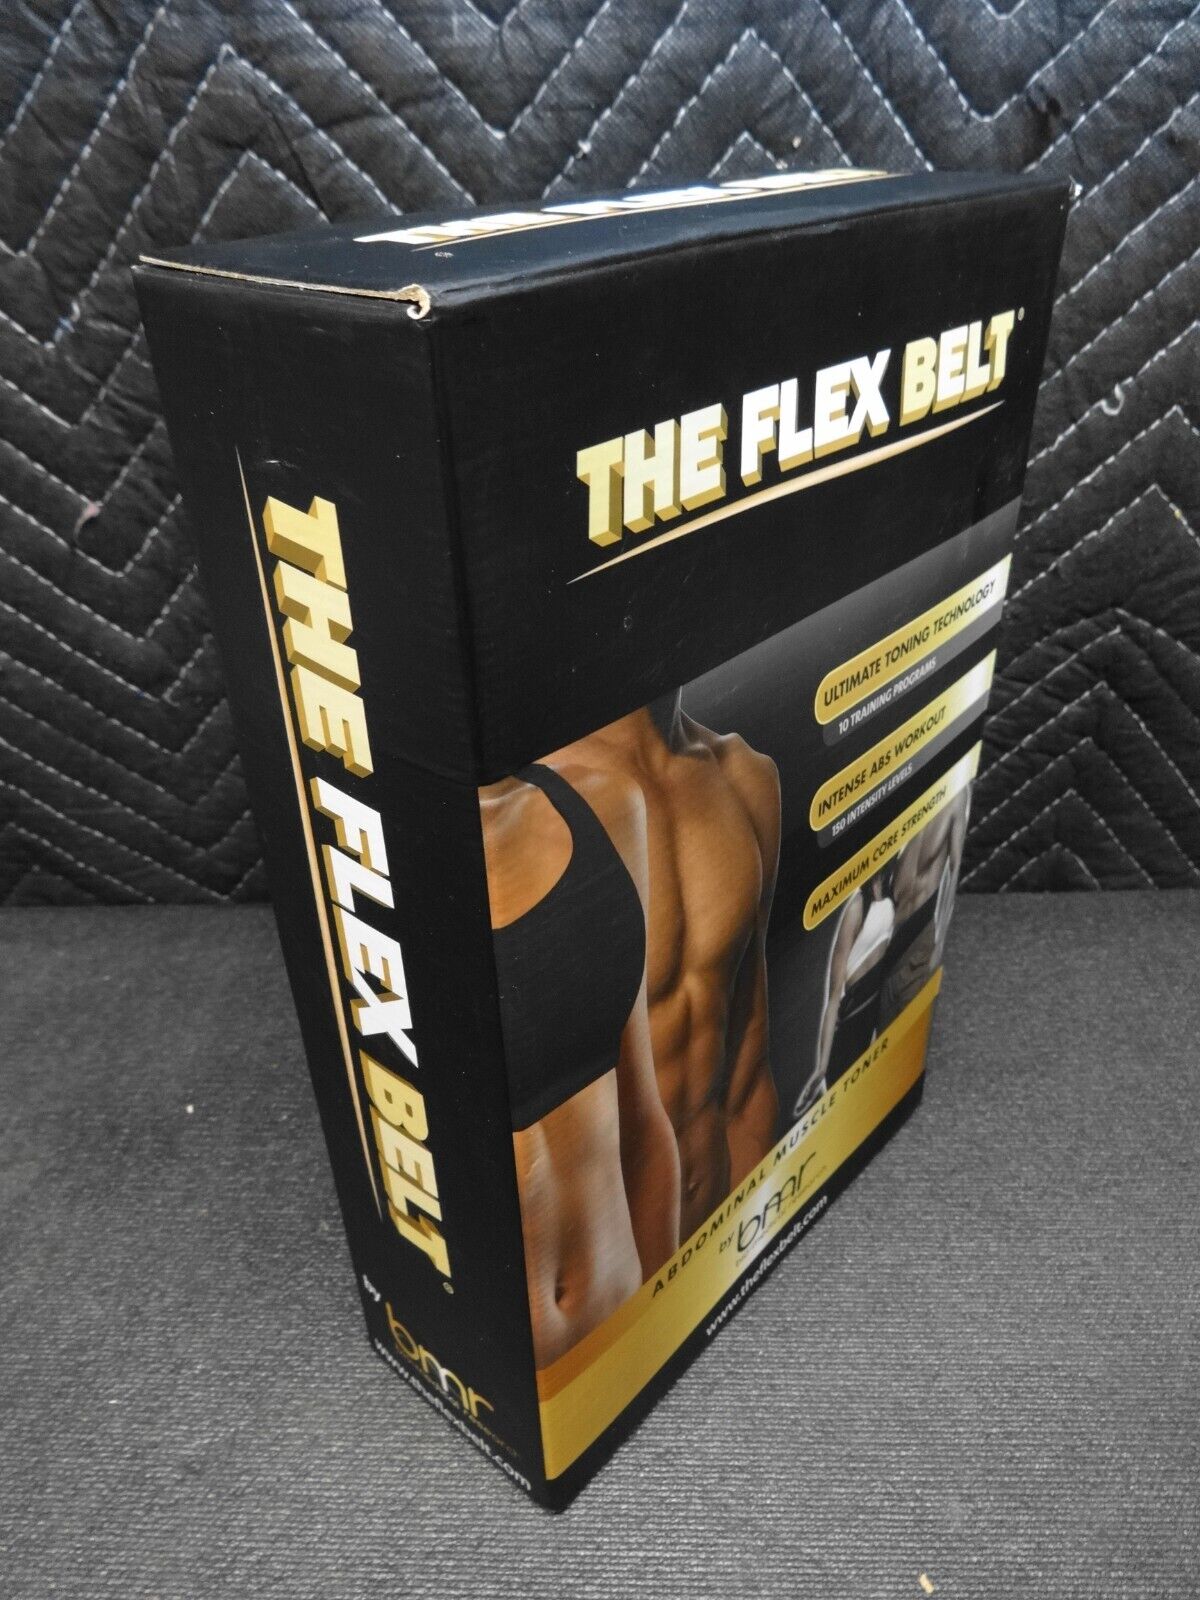 The Flex Belt Electronic Abdomnial Workout Muscle Toner BMR OPEN BOX Never Used